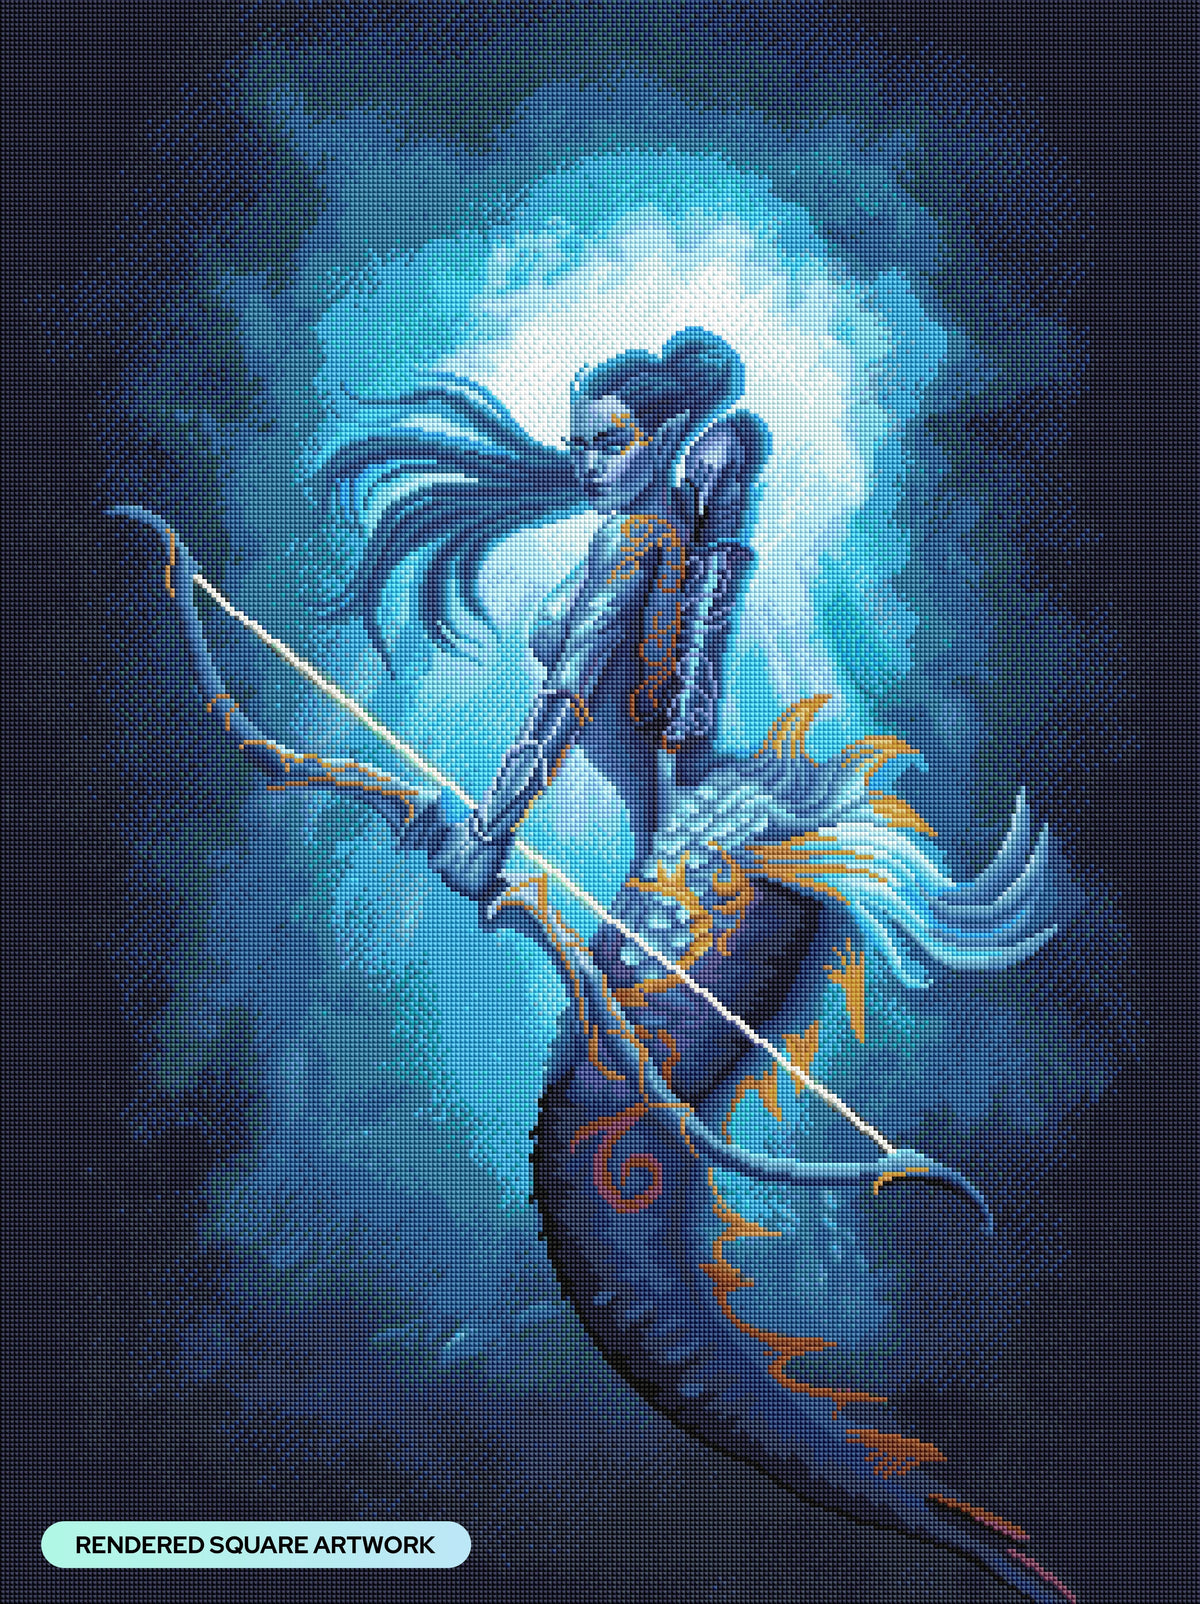 Diamond Painting Mermaid Archer 25.6" x 34.3" (65cm x 87cm) / Square With 52 Colors Including 3 ABs and 2 Fairy Dust Diamonds / 91,089